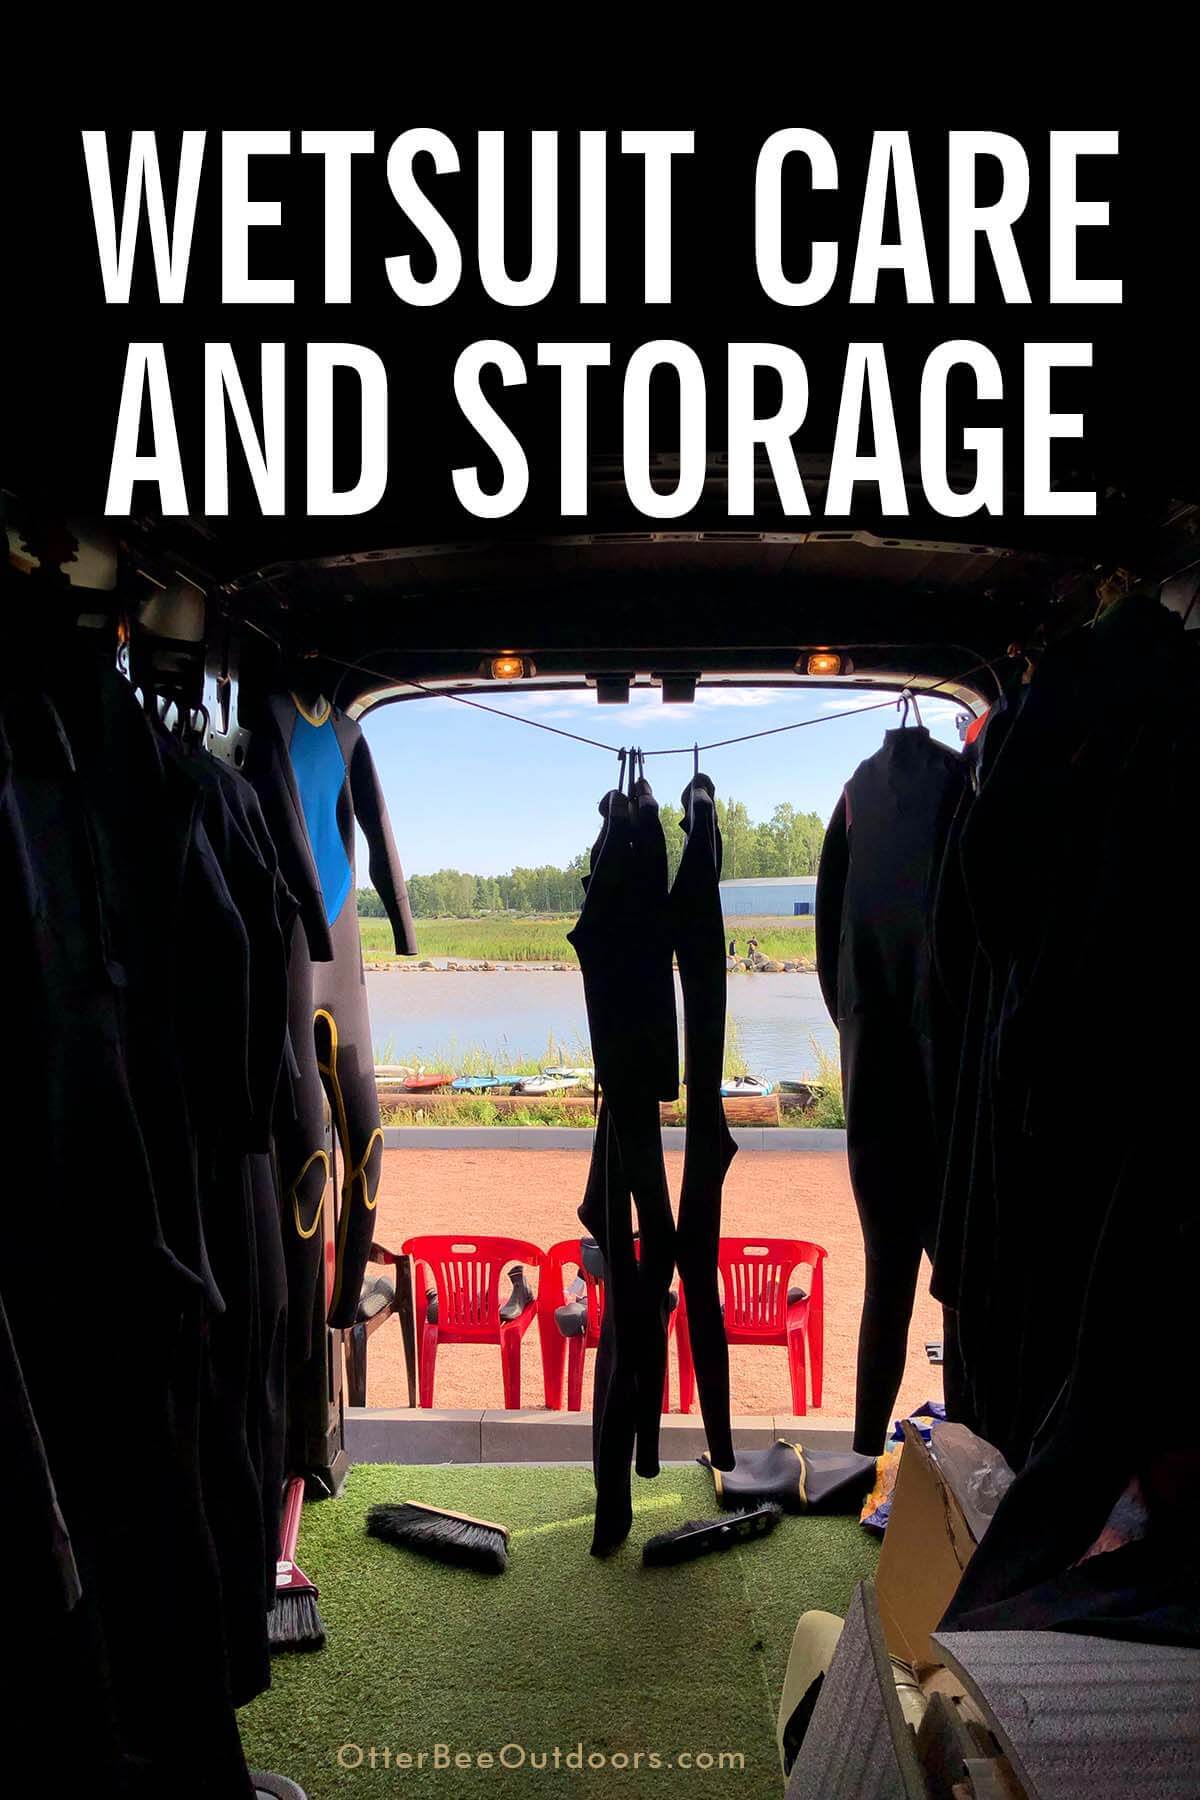 Wetsuits being hung and stored in a van before paddle boarding at a lake. The graphic says... Wetsuit Care And Storage.